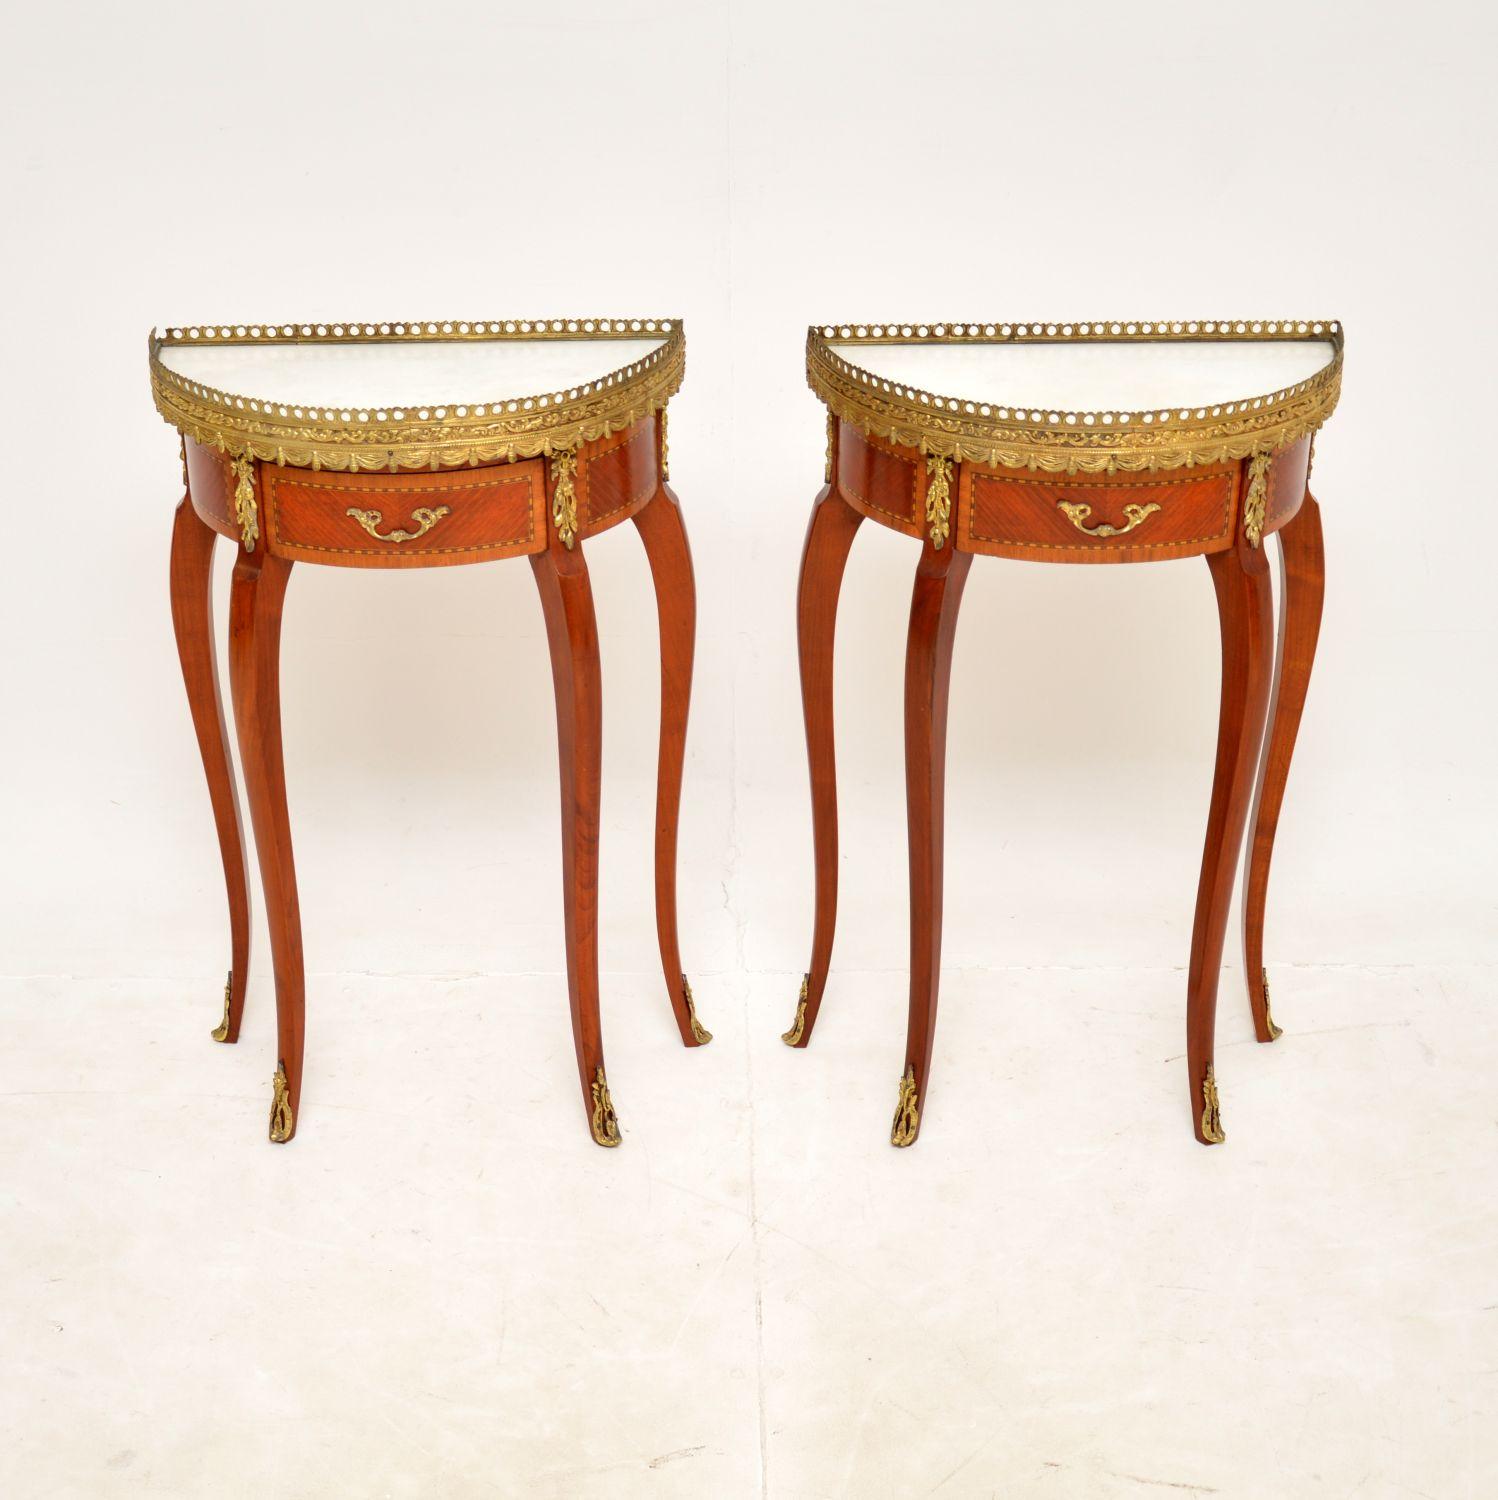 A stunning pair of antique French Demilune side tables, dating from around the 1950s.

They are a very useful Size and are of superb quality. They have white marble tops, high quality gilt metal mounts and a beautiful pierced gallery around the